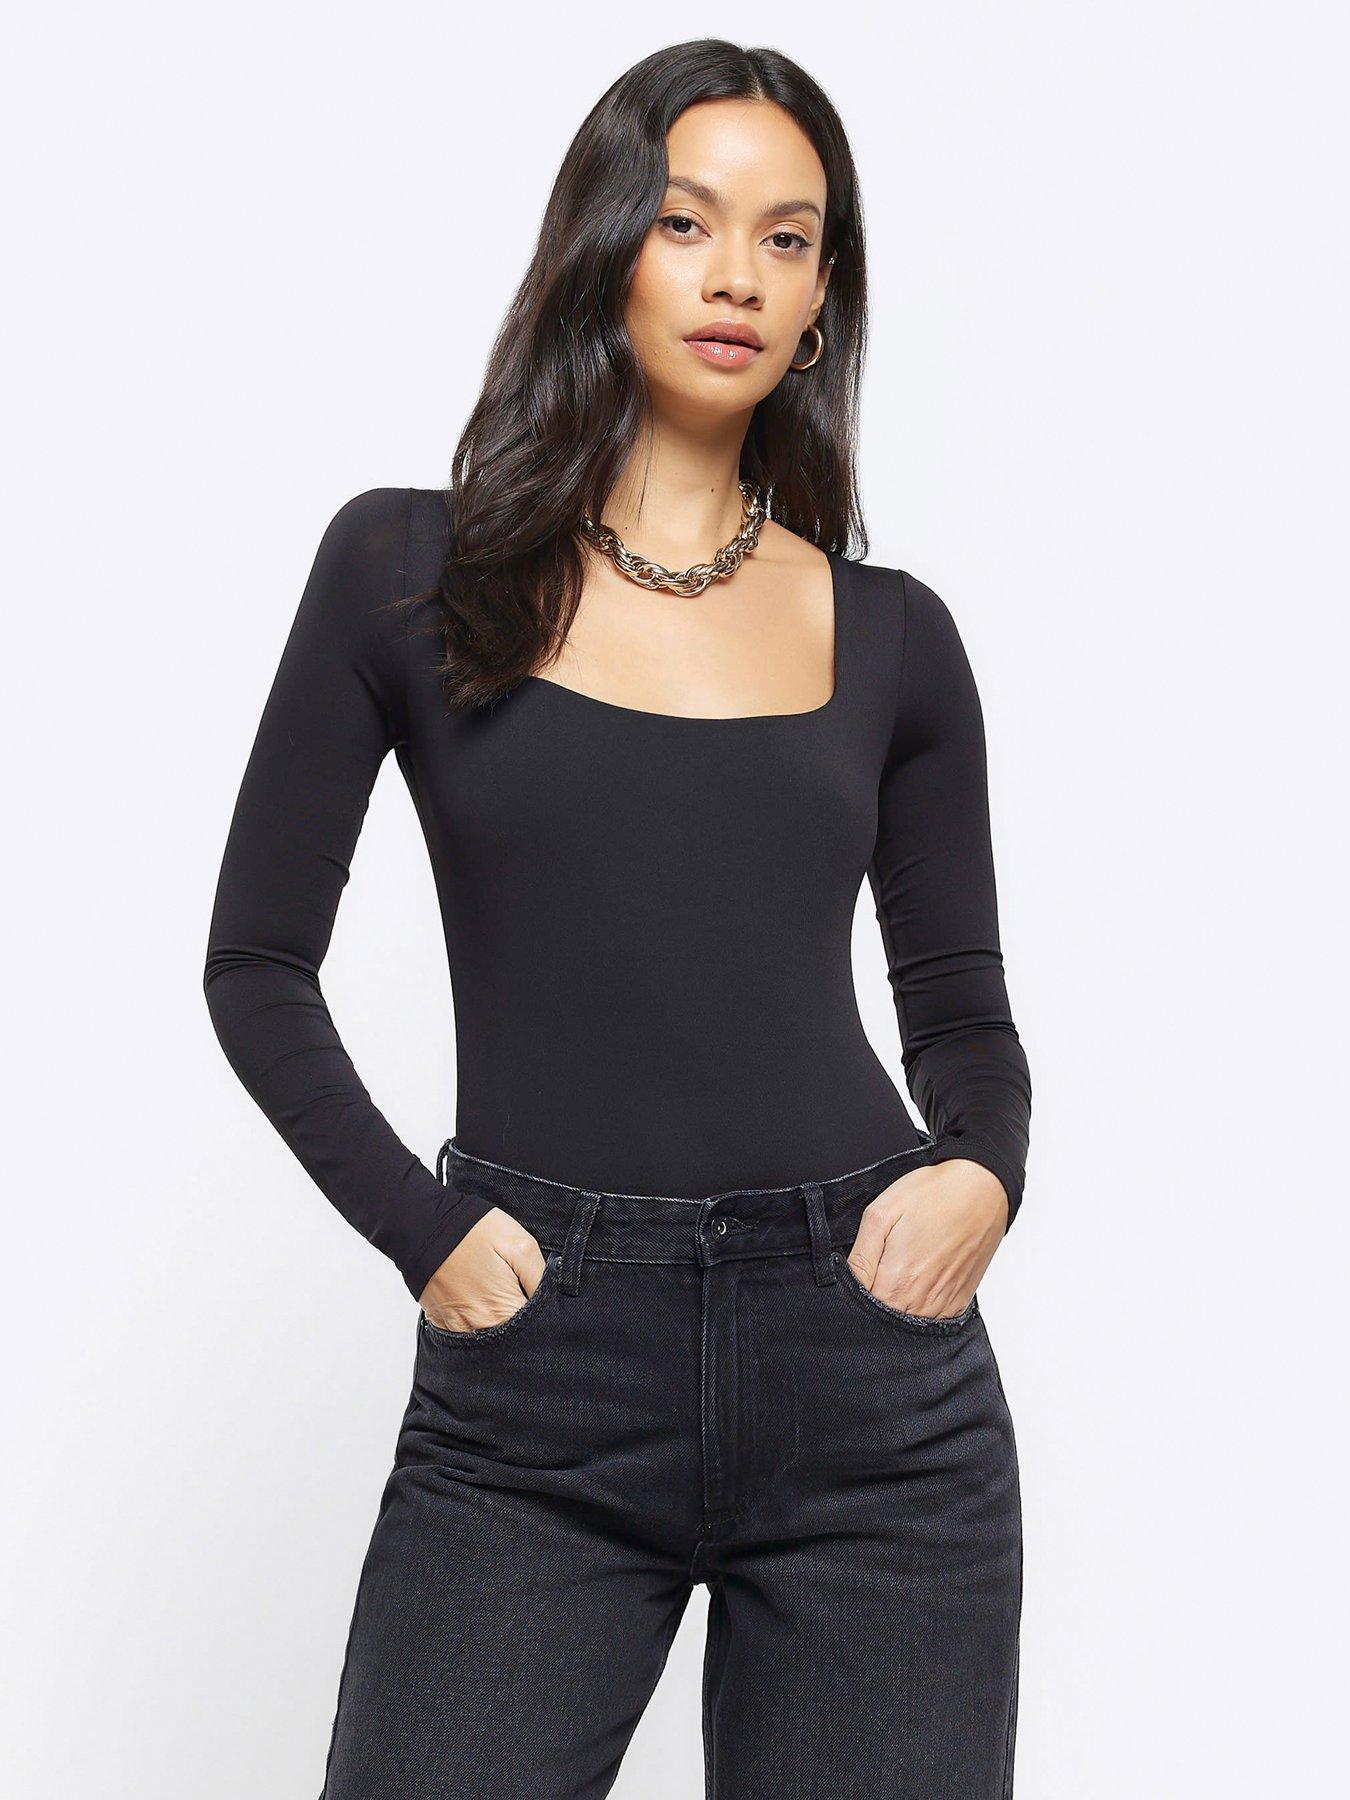 21 Black Going Out Tops We Love  Black going out tops, Black